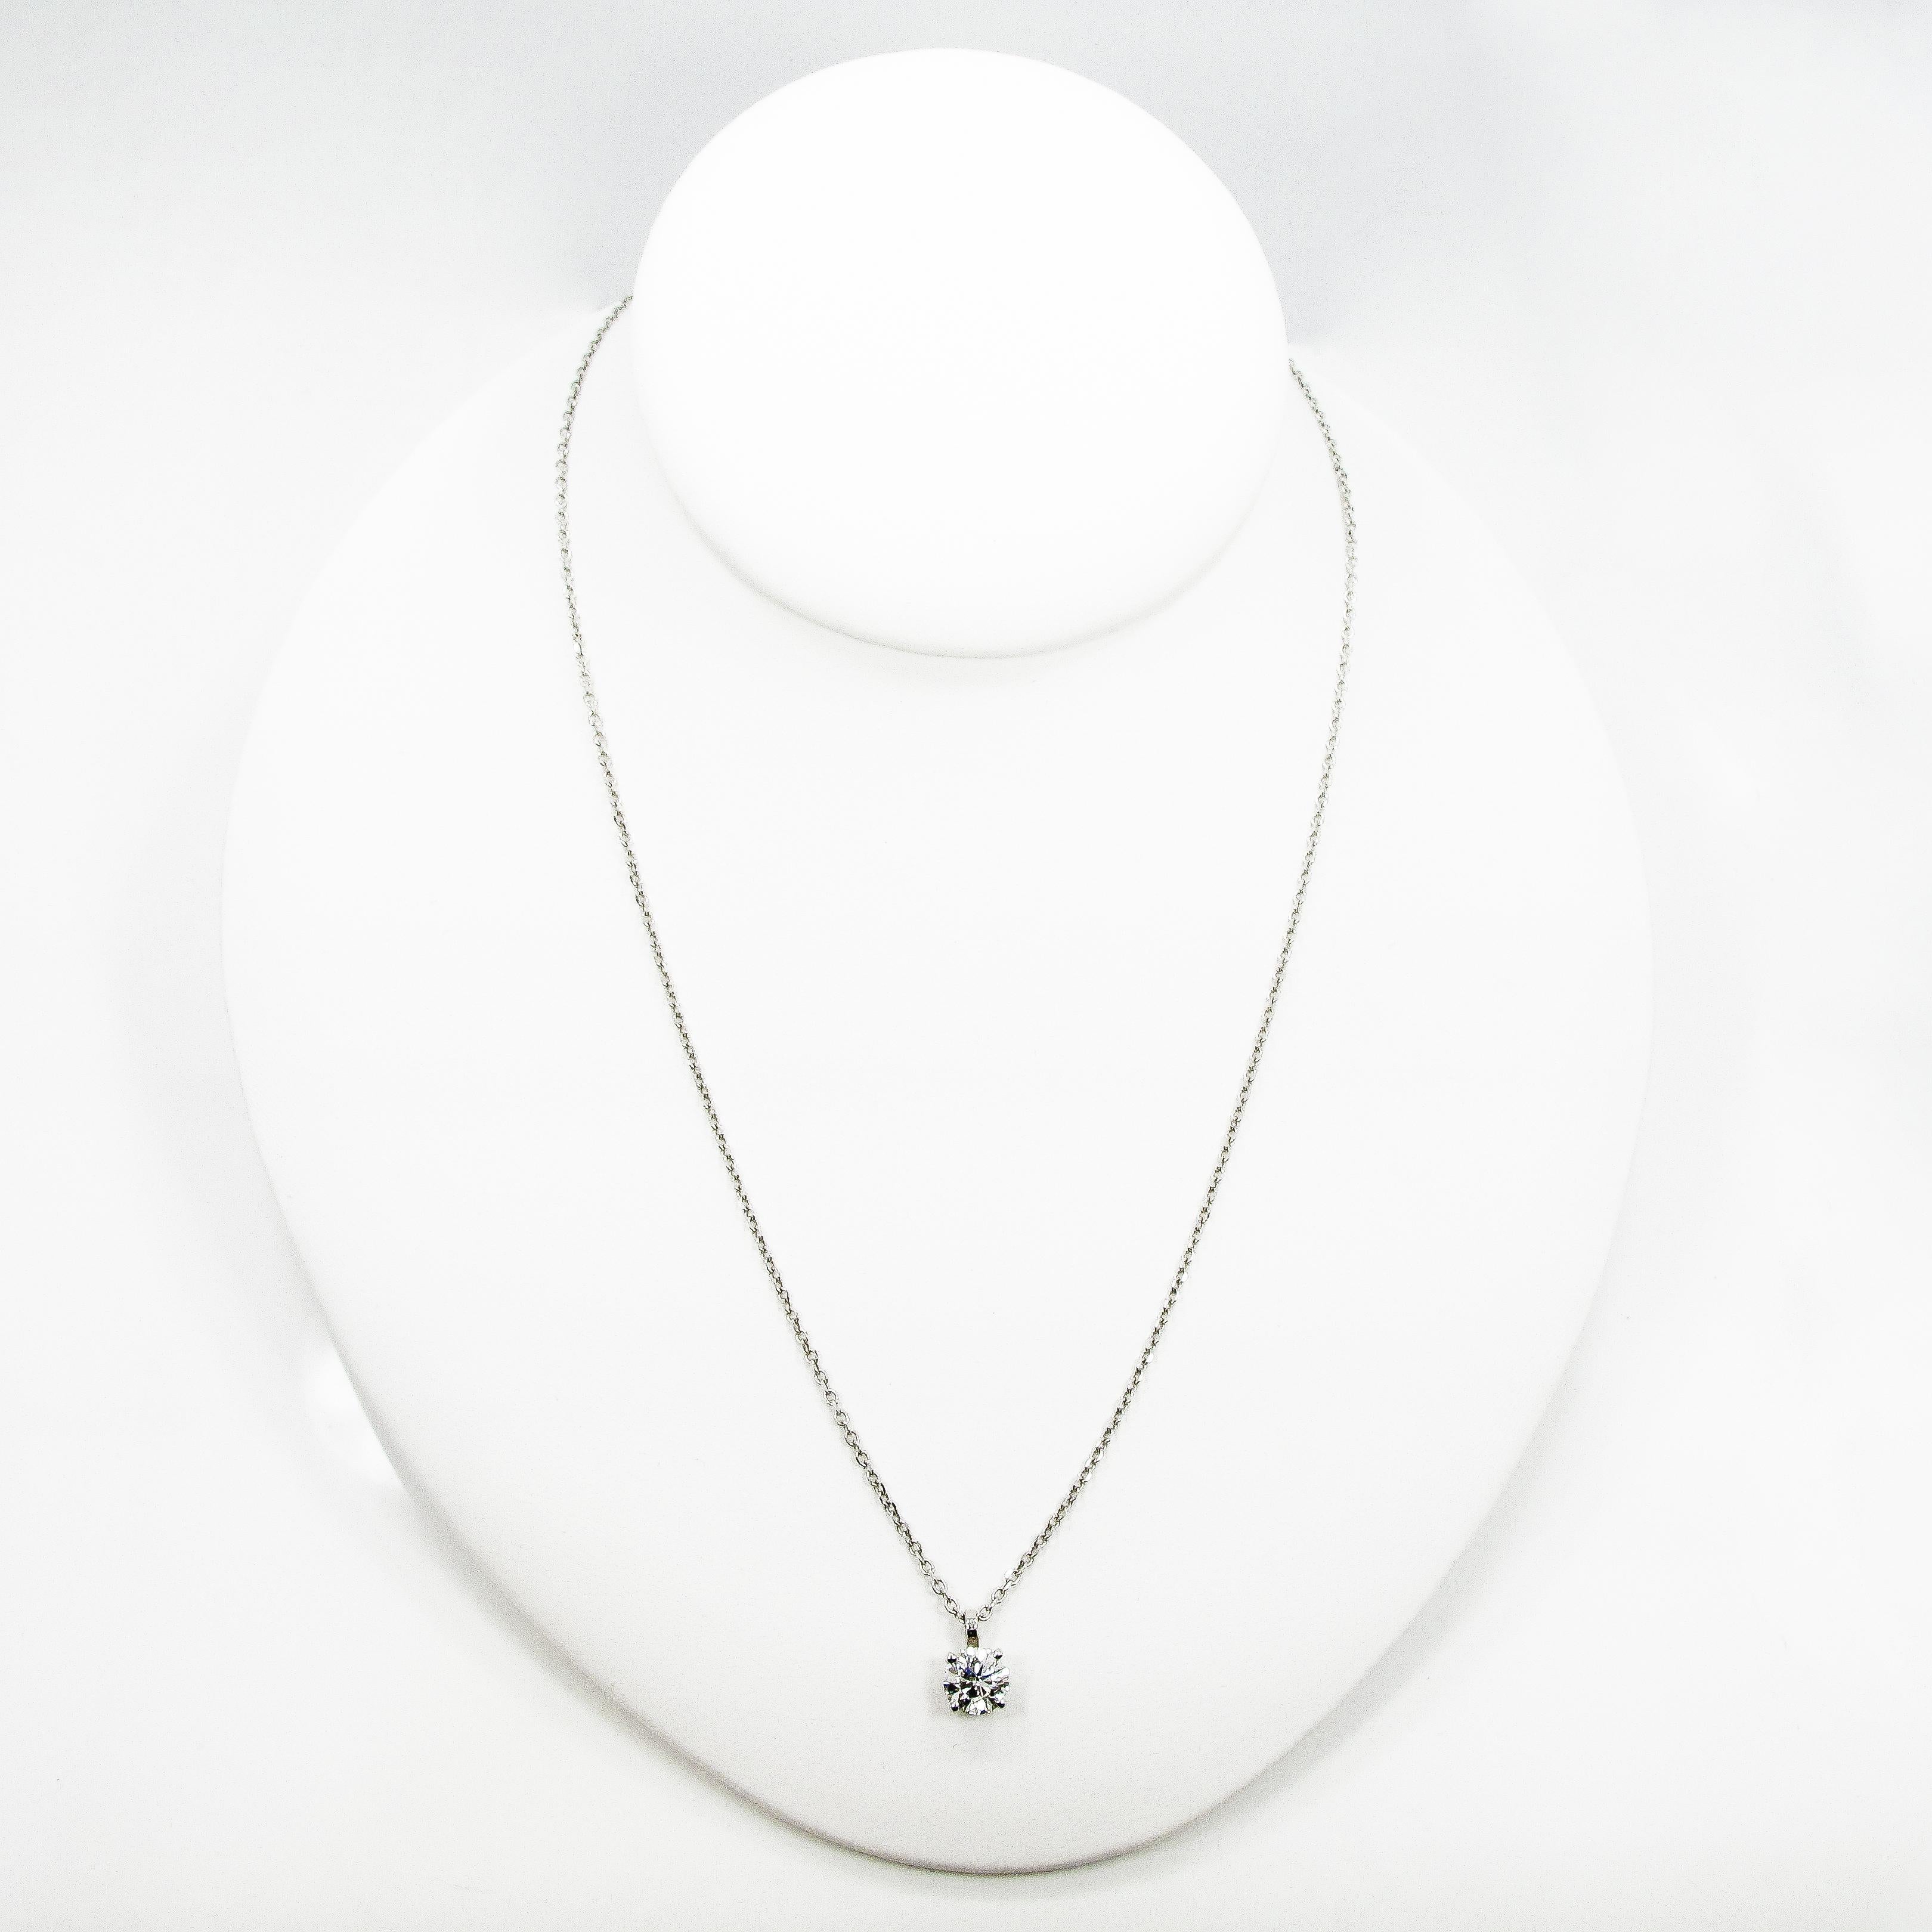 One round brilliant diamond pendant set in a 14k white gold open gallery basket. The diamond weighs 1.16ct and measures 6.75mm. The stone is F in color, I1 in clarity. The basket hangs from a simple bale on a 16 inch 14k white gold cable chain (with